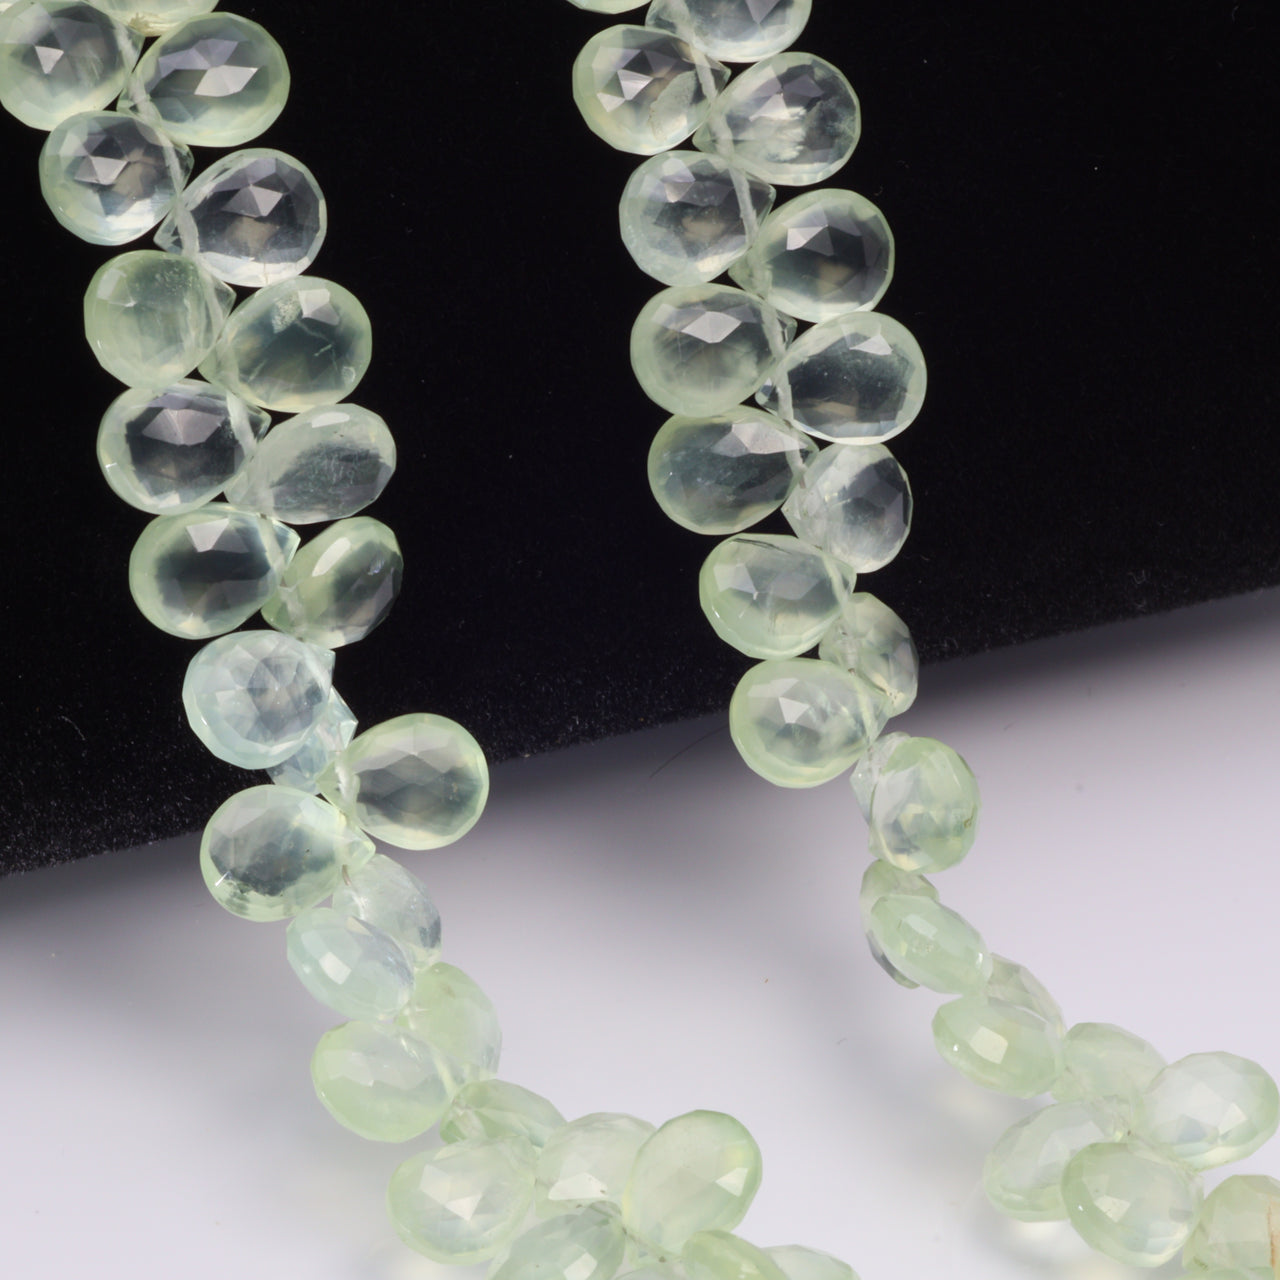 Green Prehnite 9x7mm Faceted Pear Shaped Briolettes